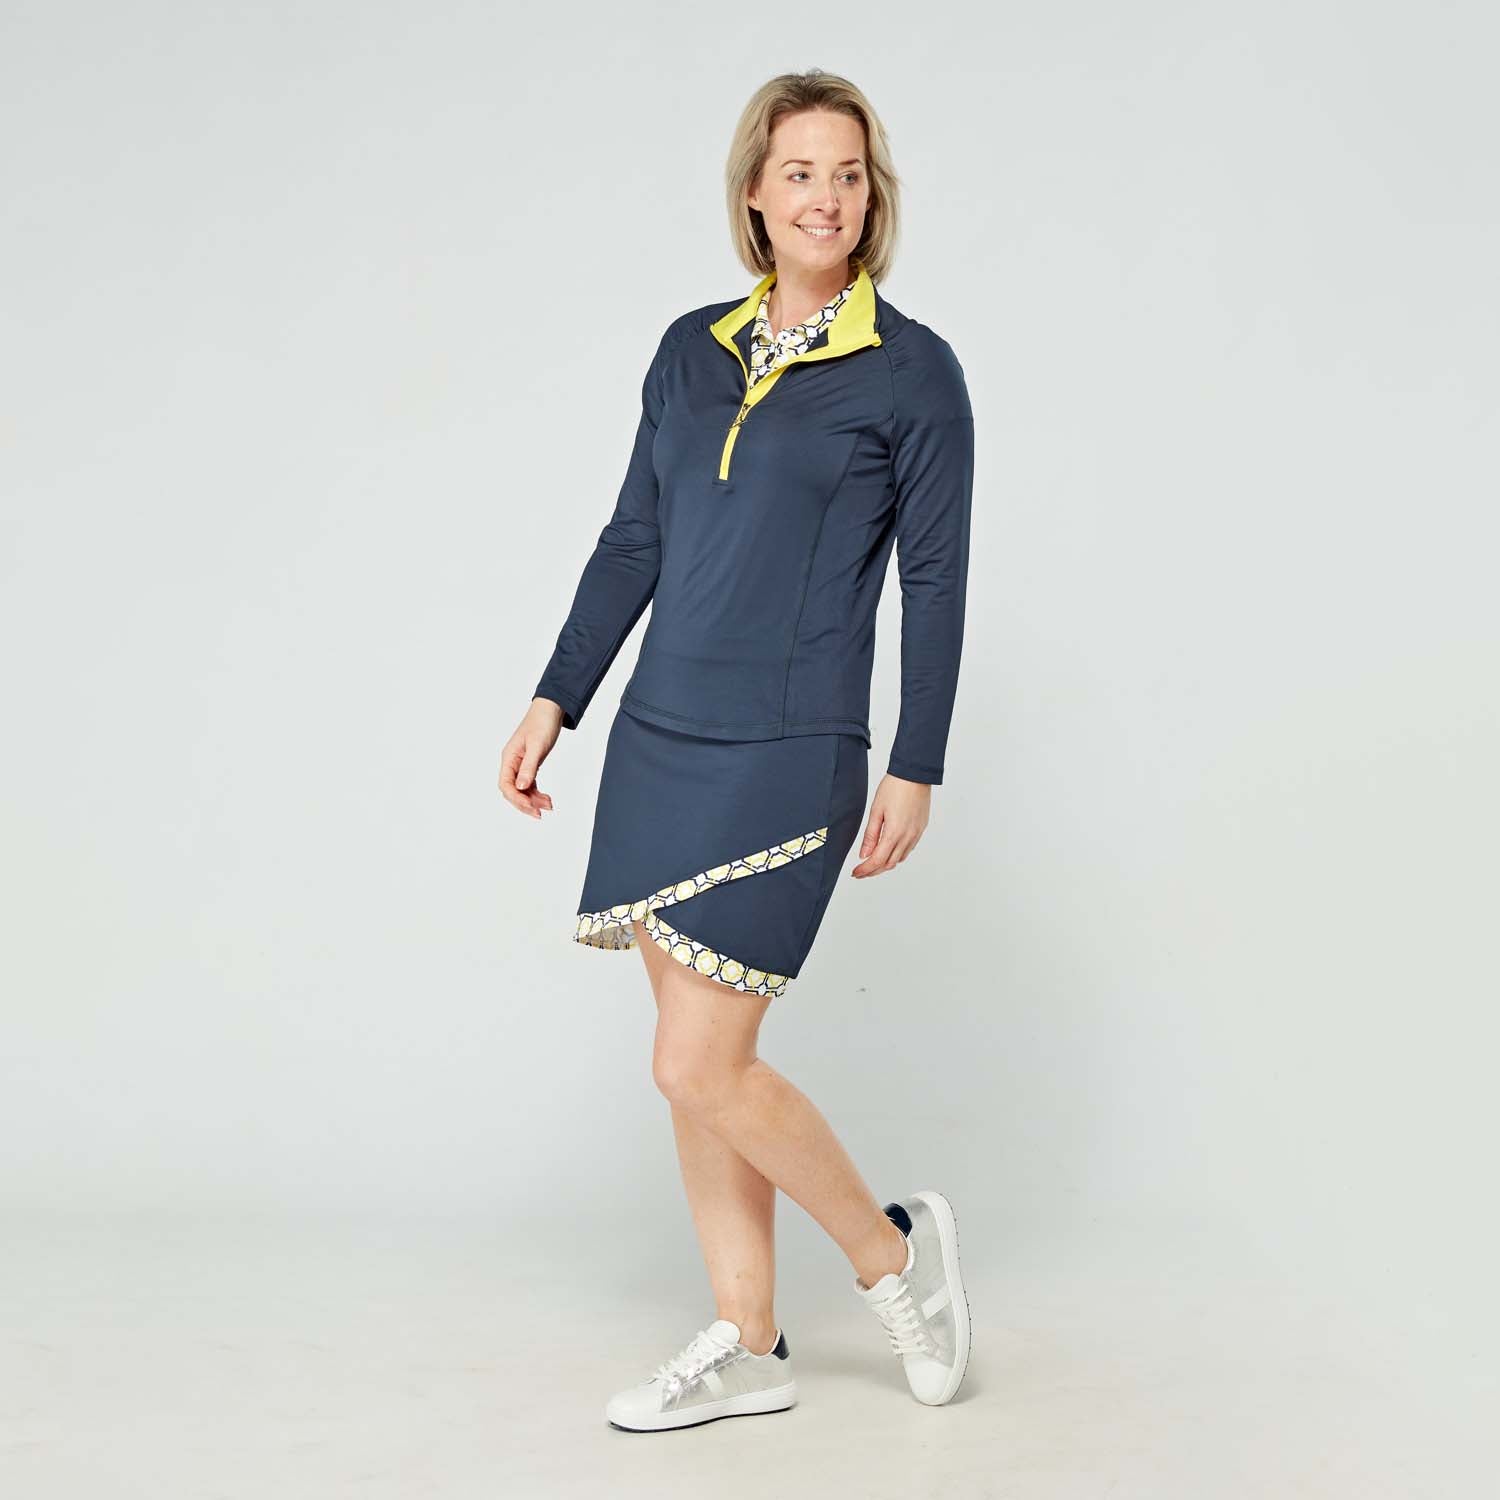 Swing Out Sister Ladies Navy Pull-On Scalloped Skort with Navy and Sunshine Trim